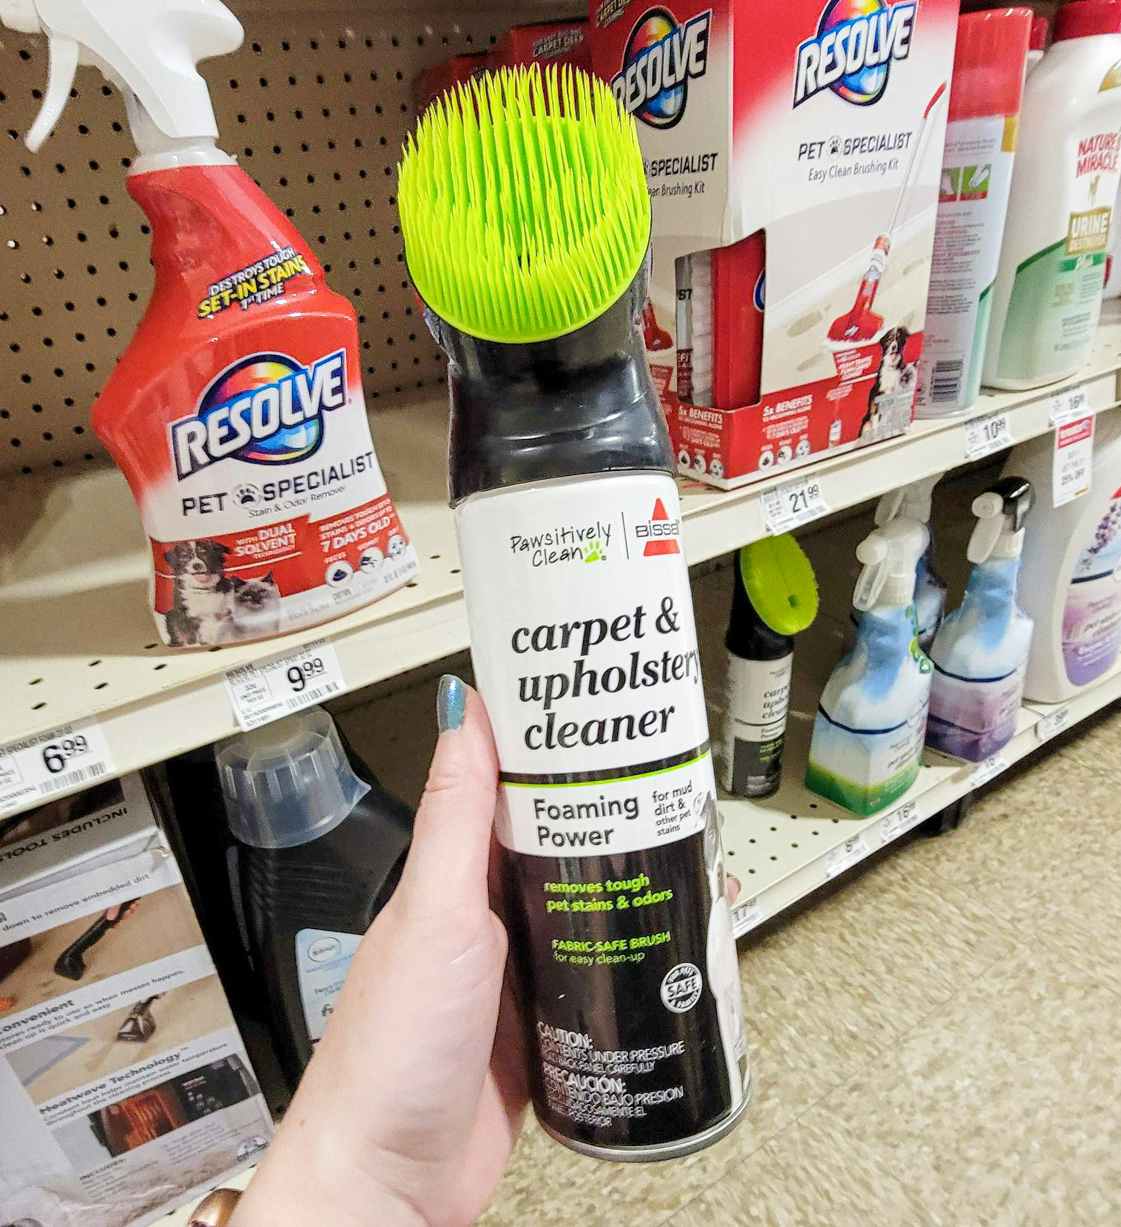 hand holding a bottle of bissell carpet and upholstery cleaner with a brush on it